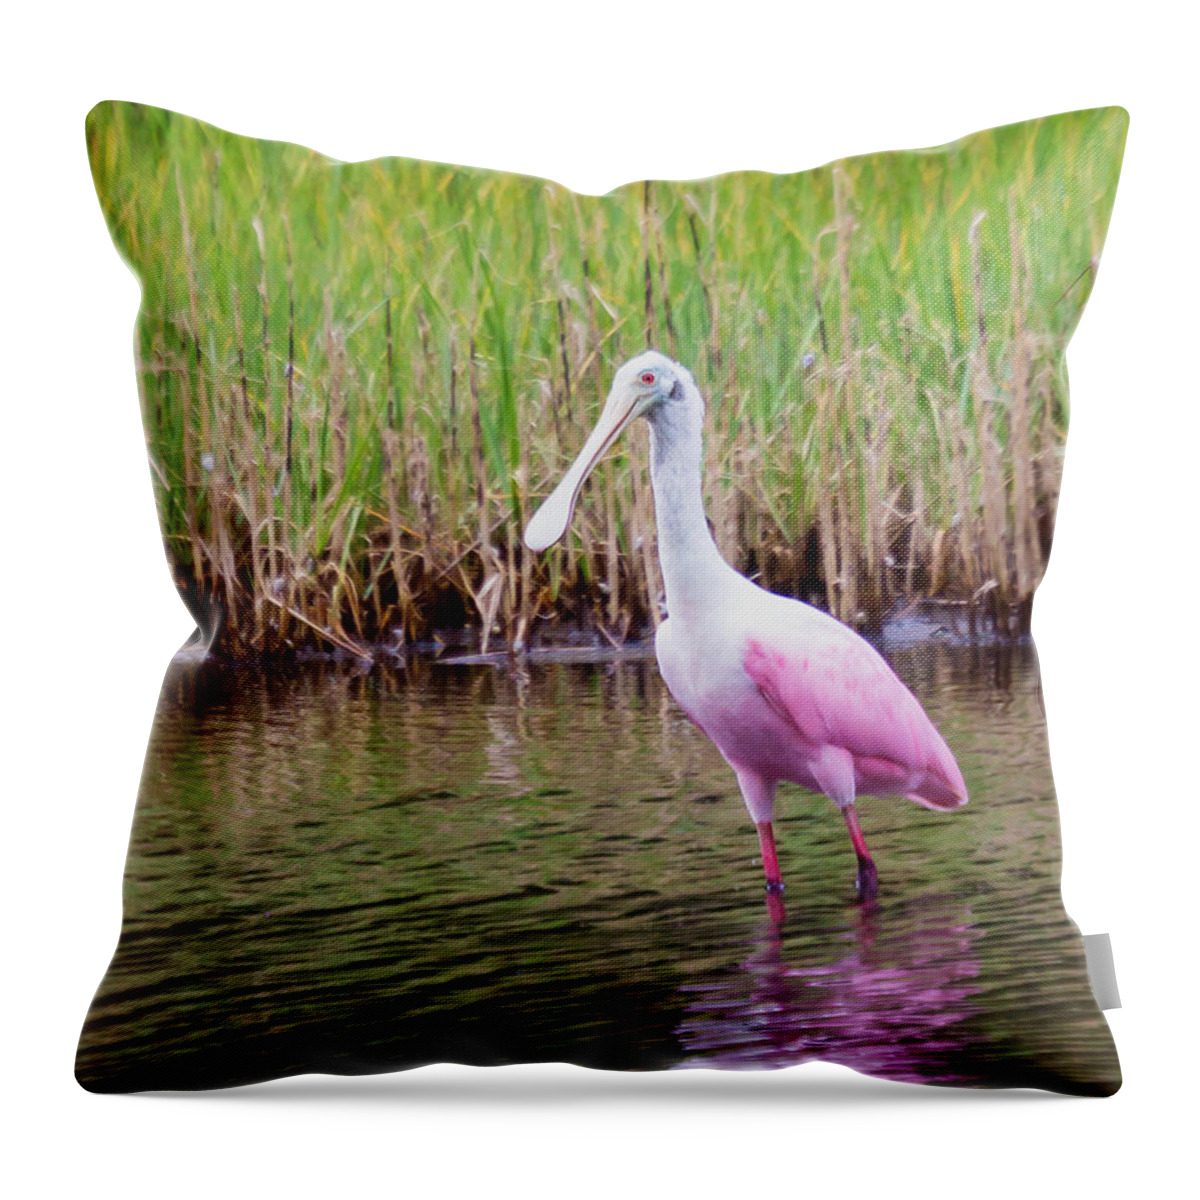 Wildlfe Throw Pillow featuring the photograph Roseate Spoonbill by Patricia Schaefer